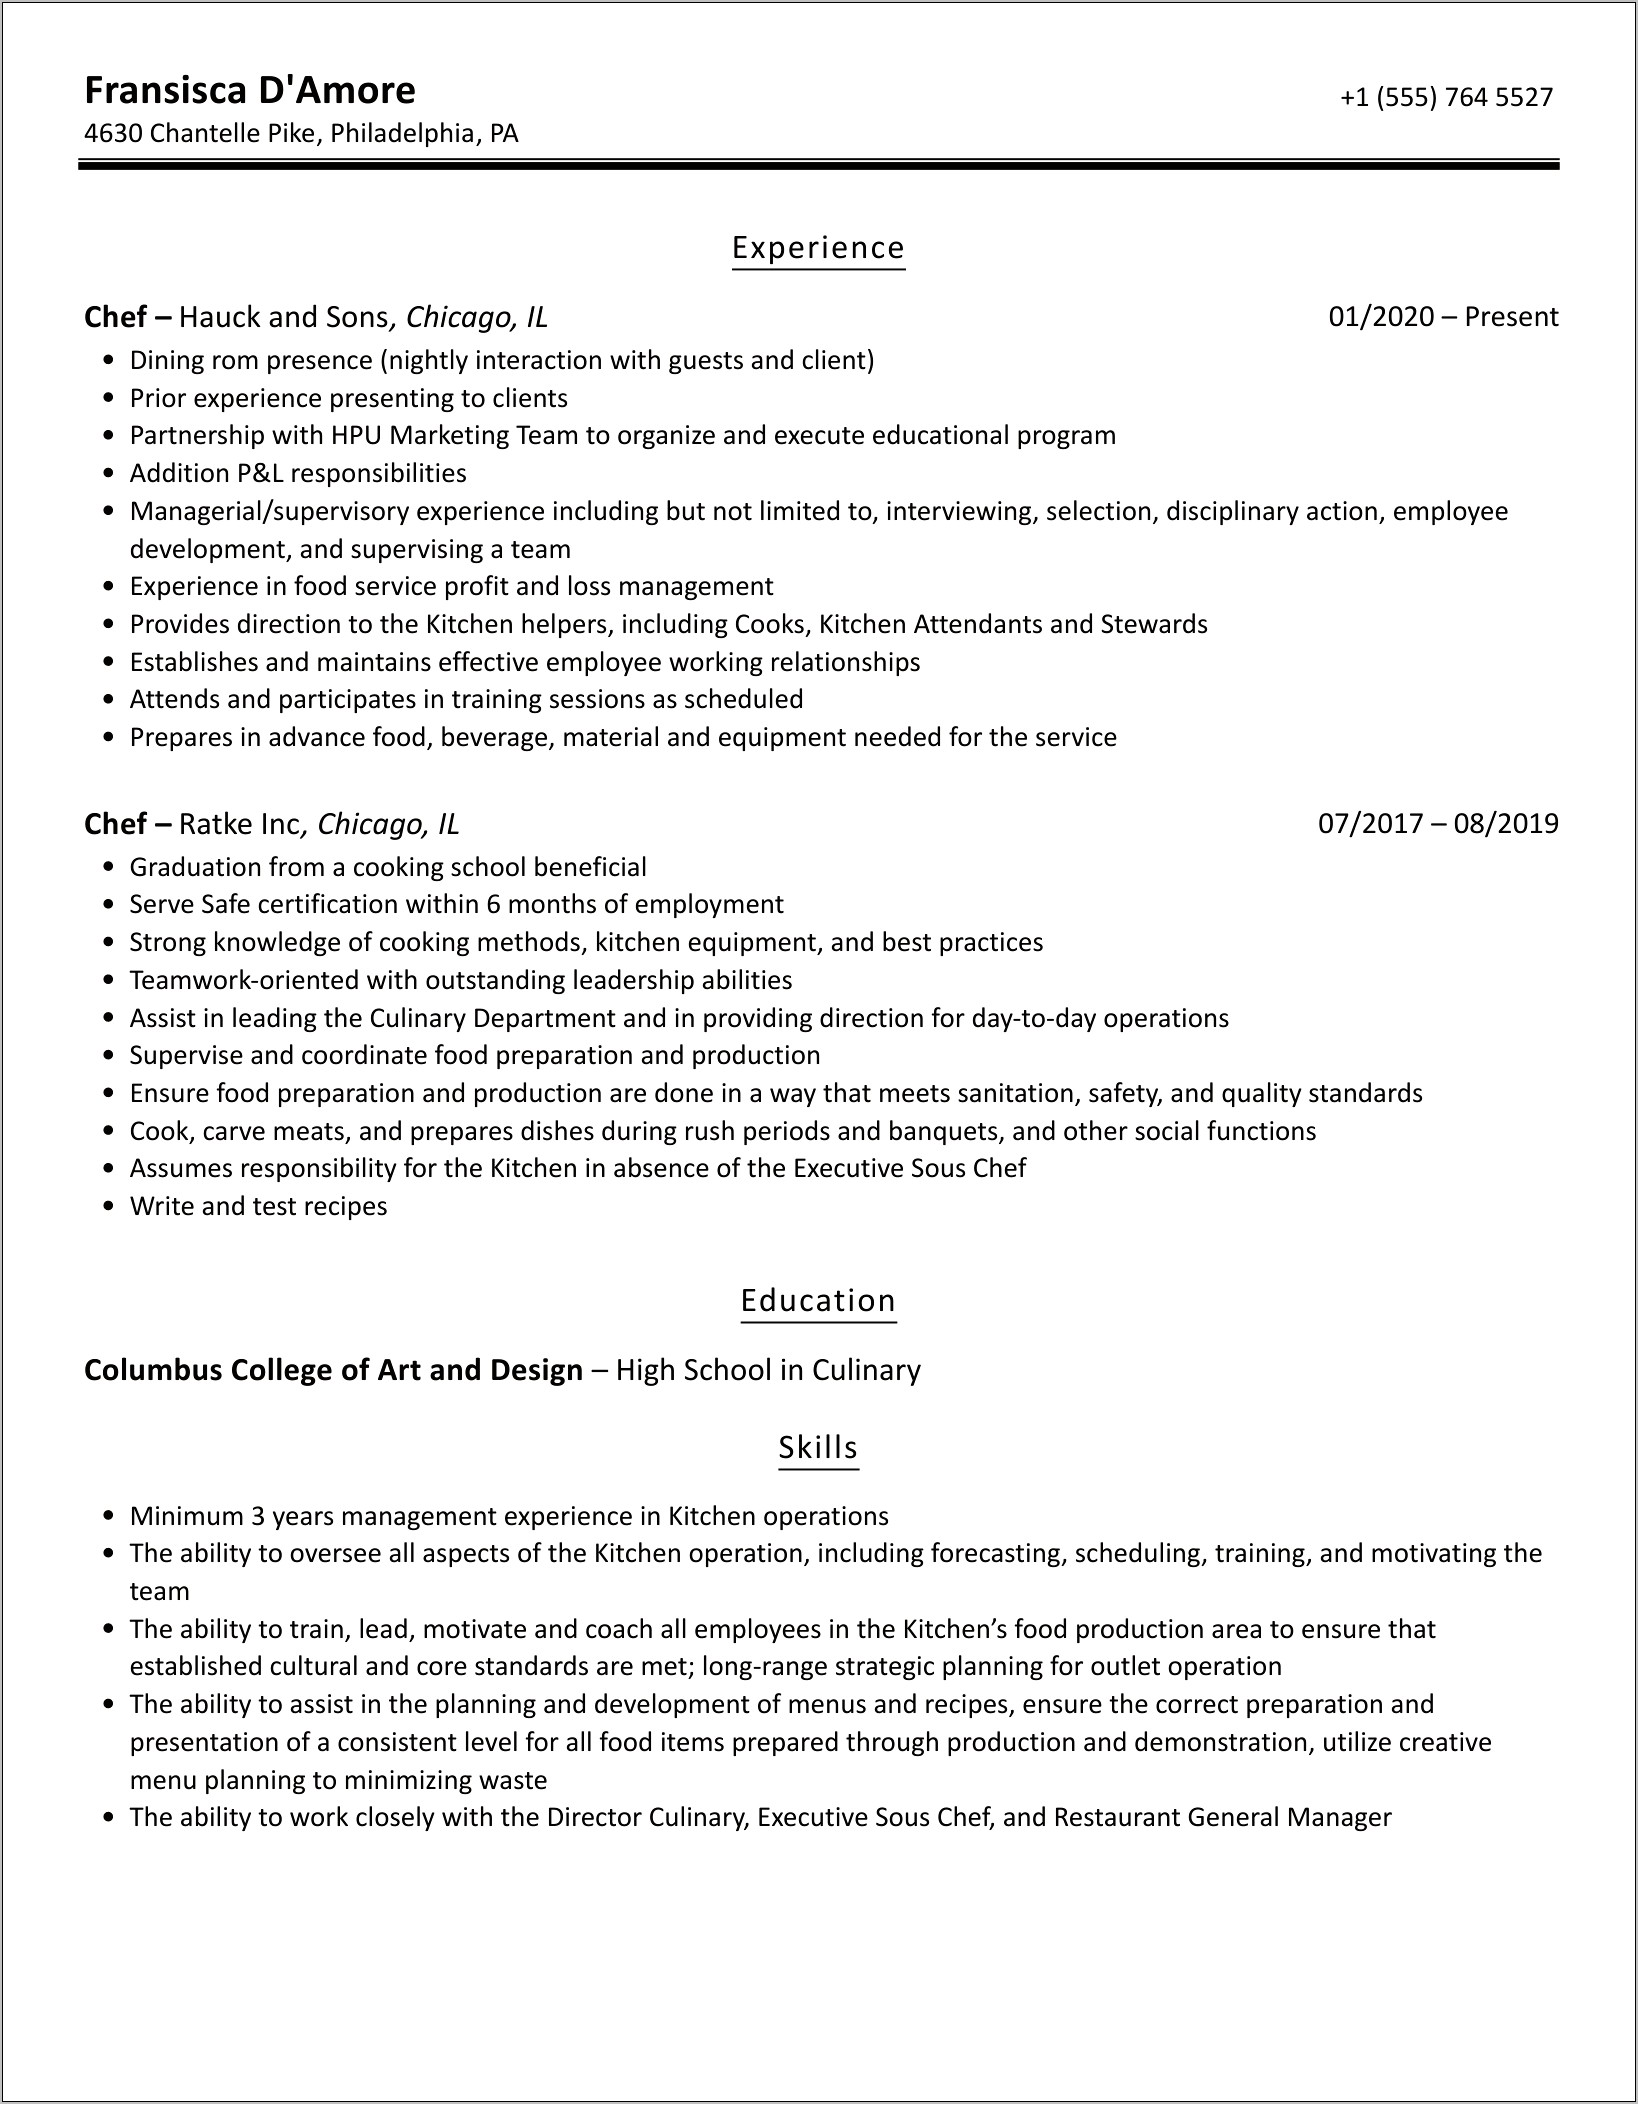 Resume Samples For A Chef